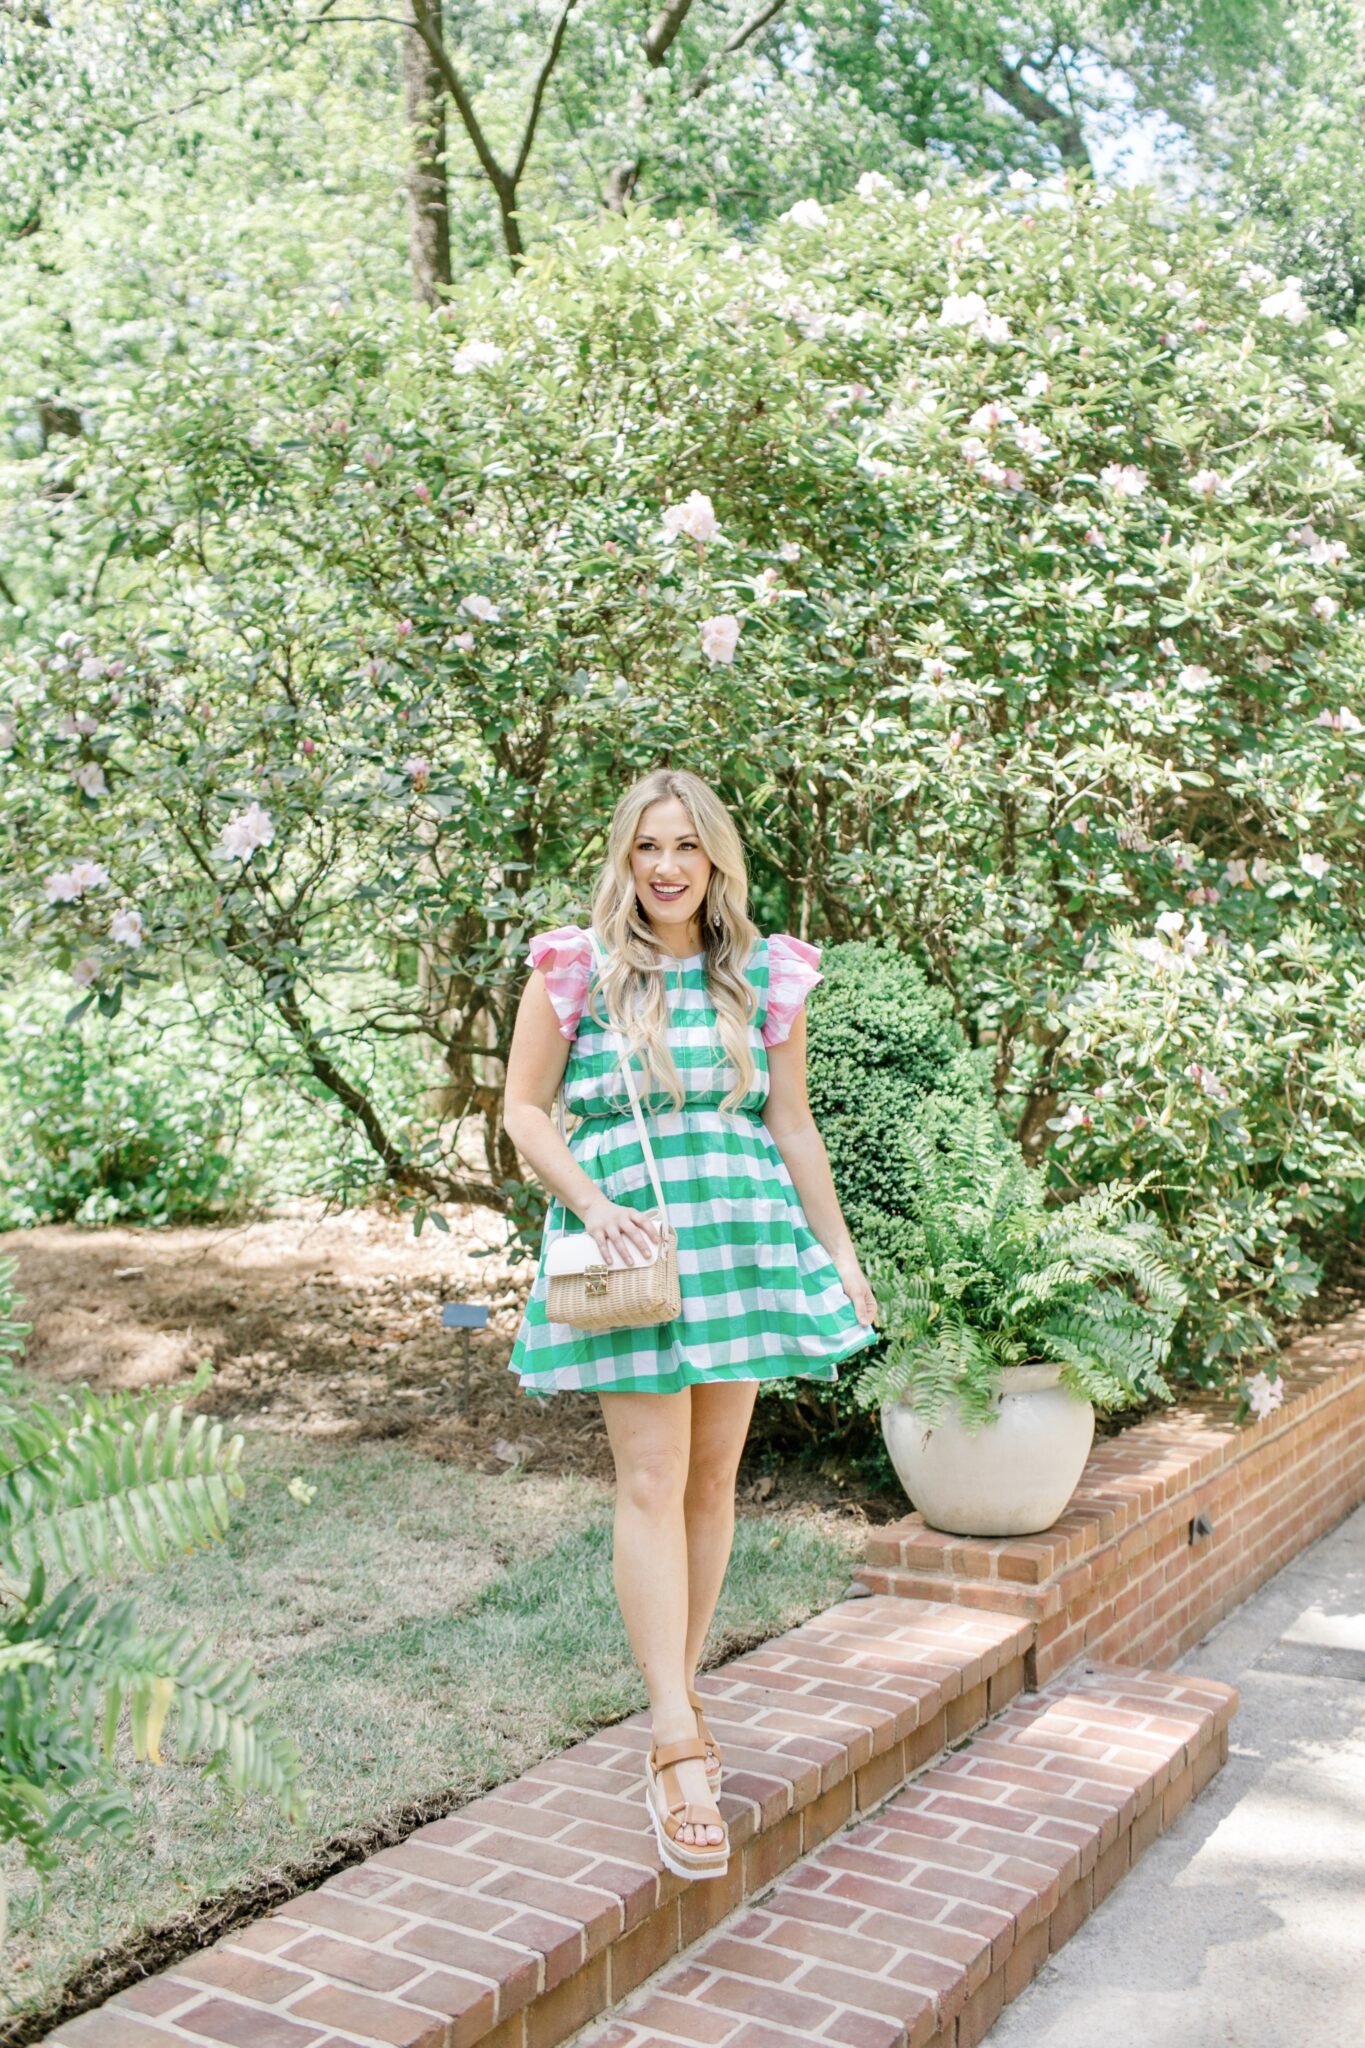 kentucky derby dress: green plaid dress with pink sleeves